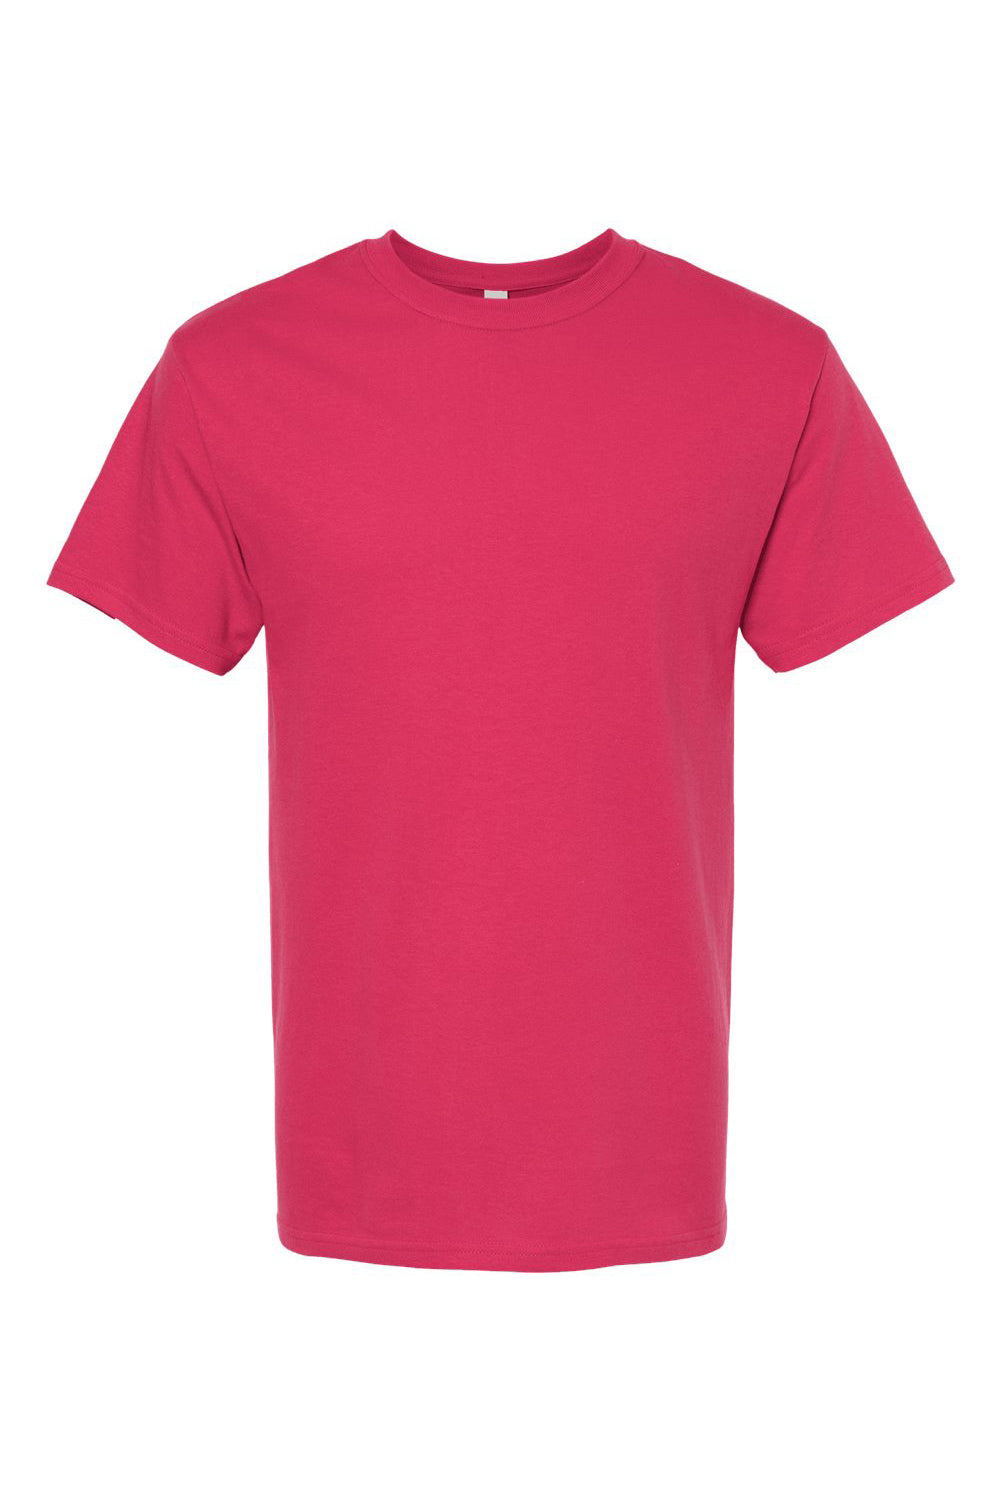 M&O 4800 Mens Gold Soft Touch Short Sleeve Crewneck T-Shirt Heliconia Pink Flat Front